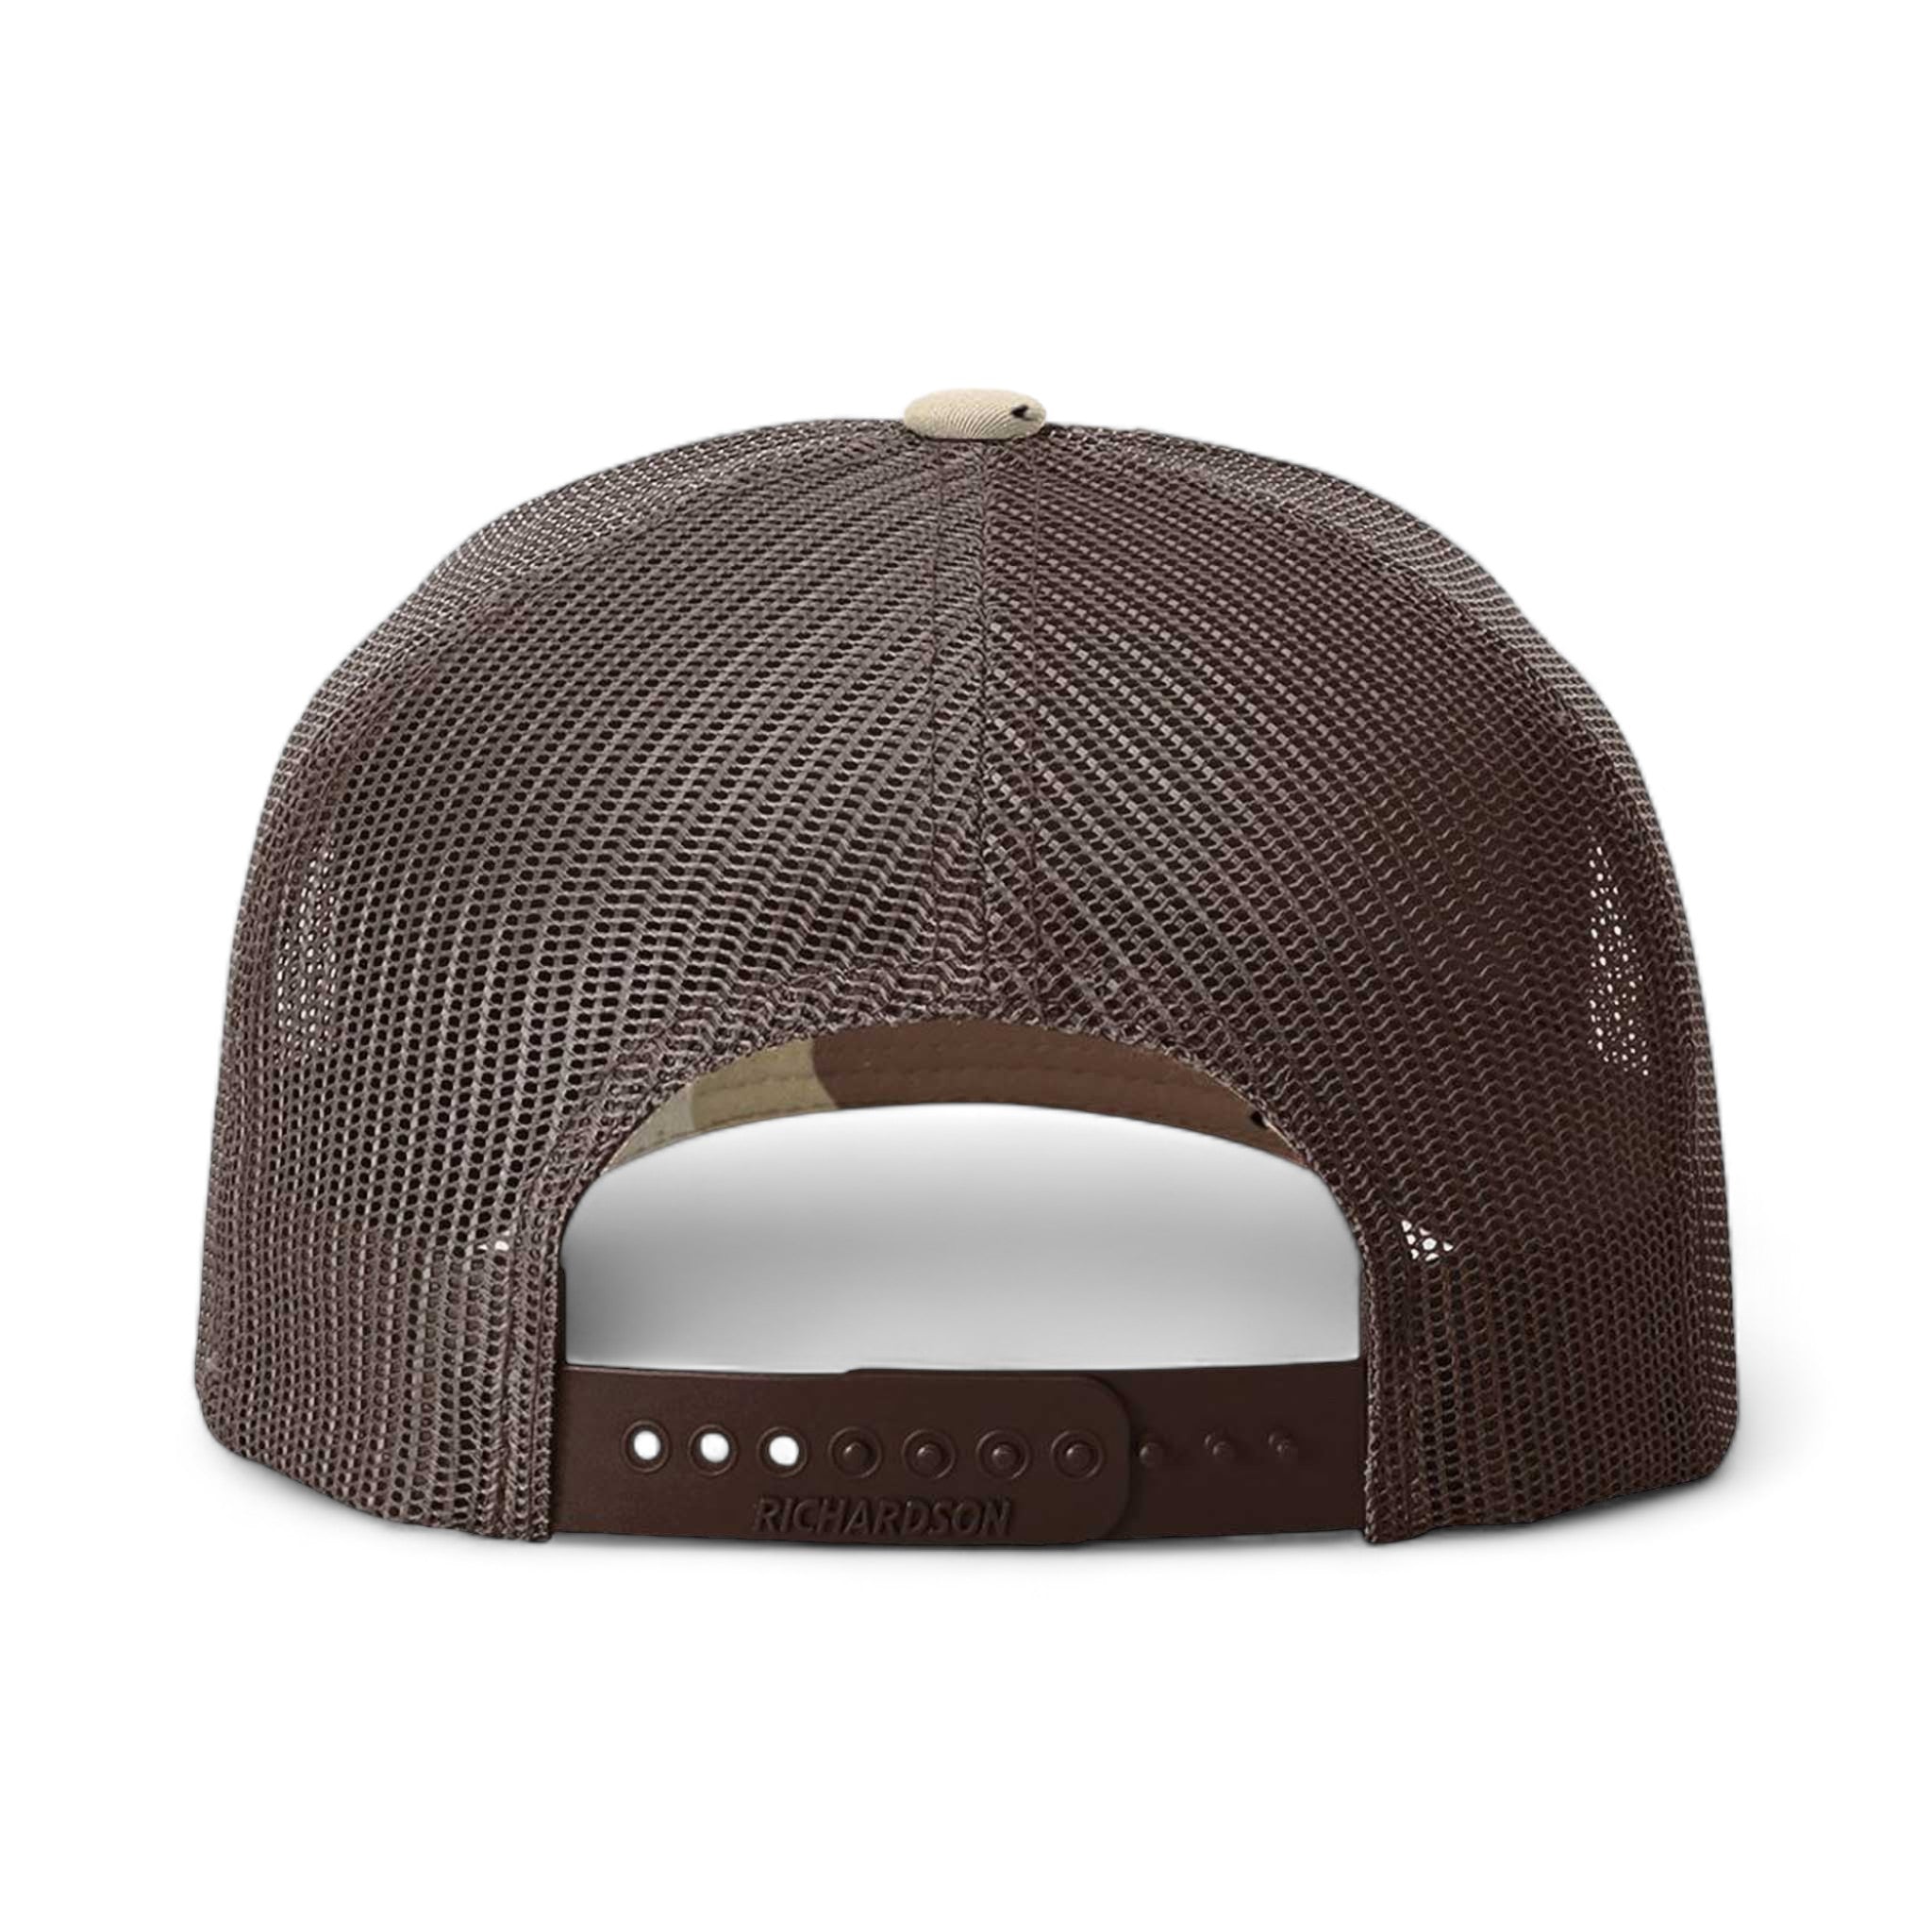 Back view of Richardson 112PFP custom hat in desert camo and brown